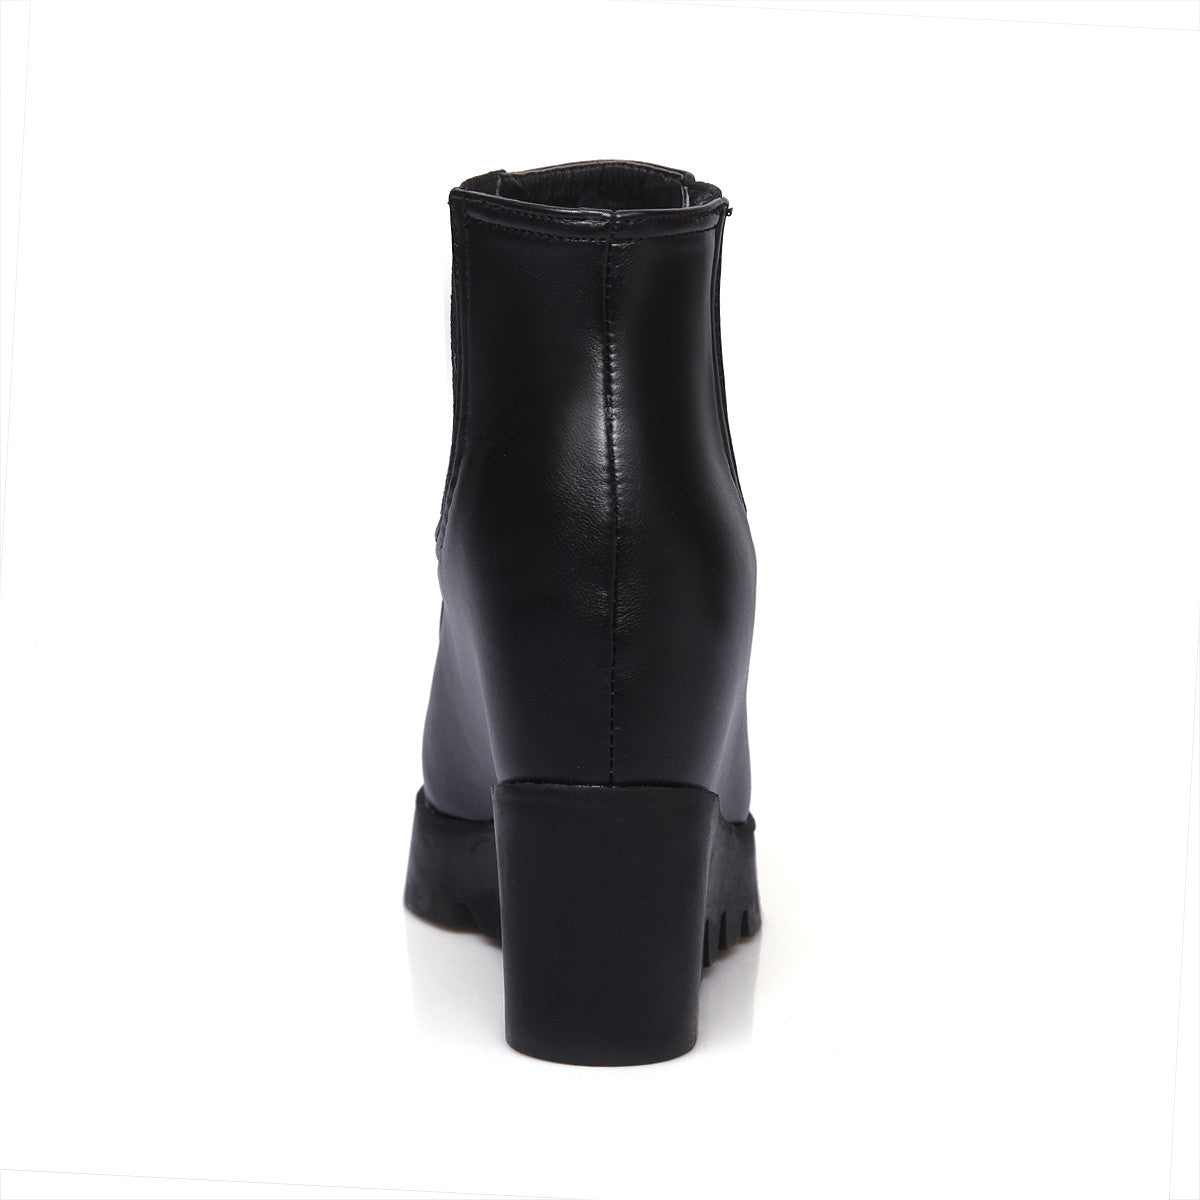 Black Wedges Boots Women Shoes Fall|Winter 11191501